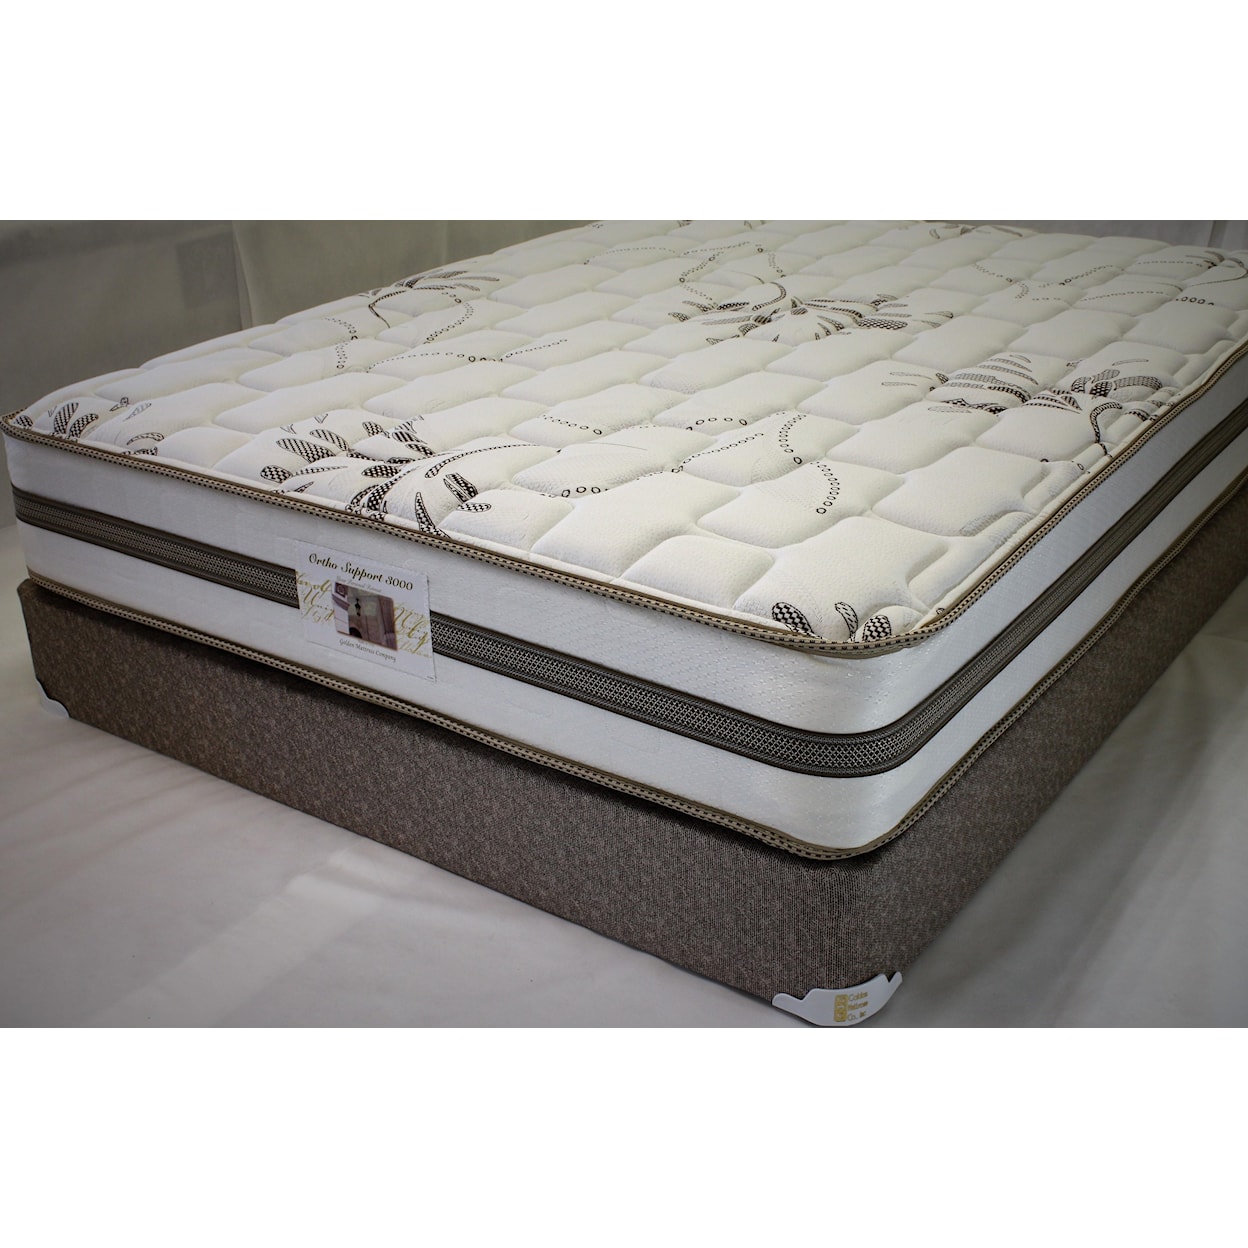 Golden Mattress Company Ortho Support 3000 Series Mattress and Foundation